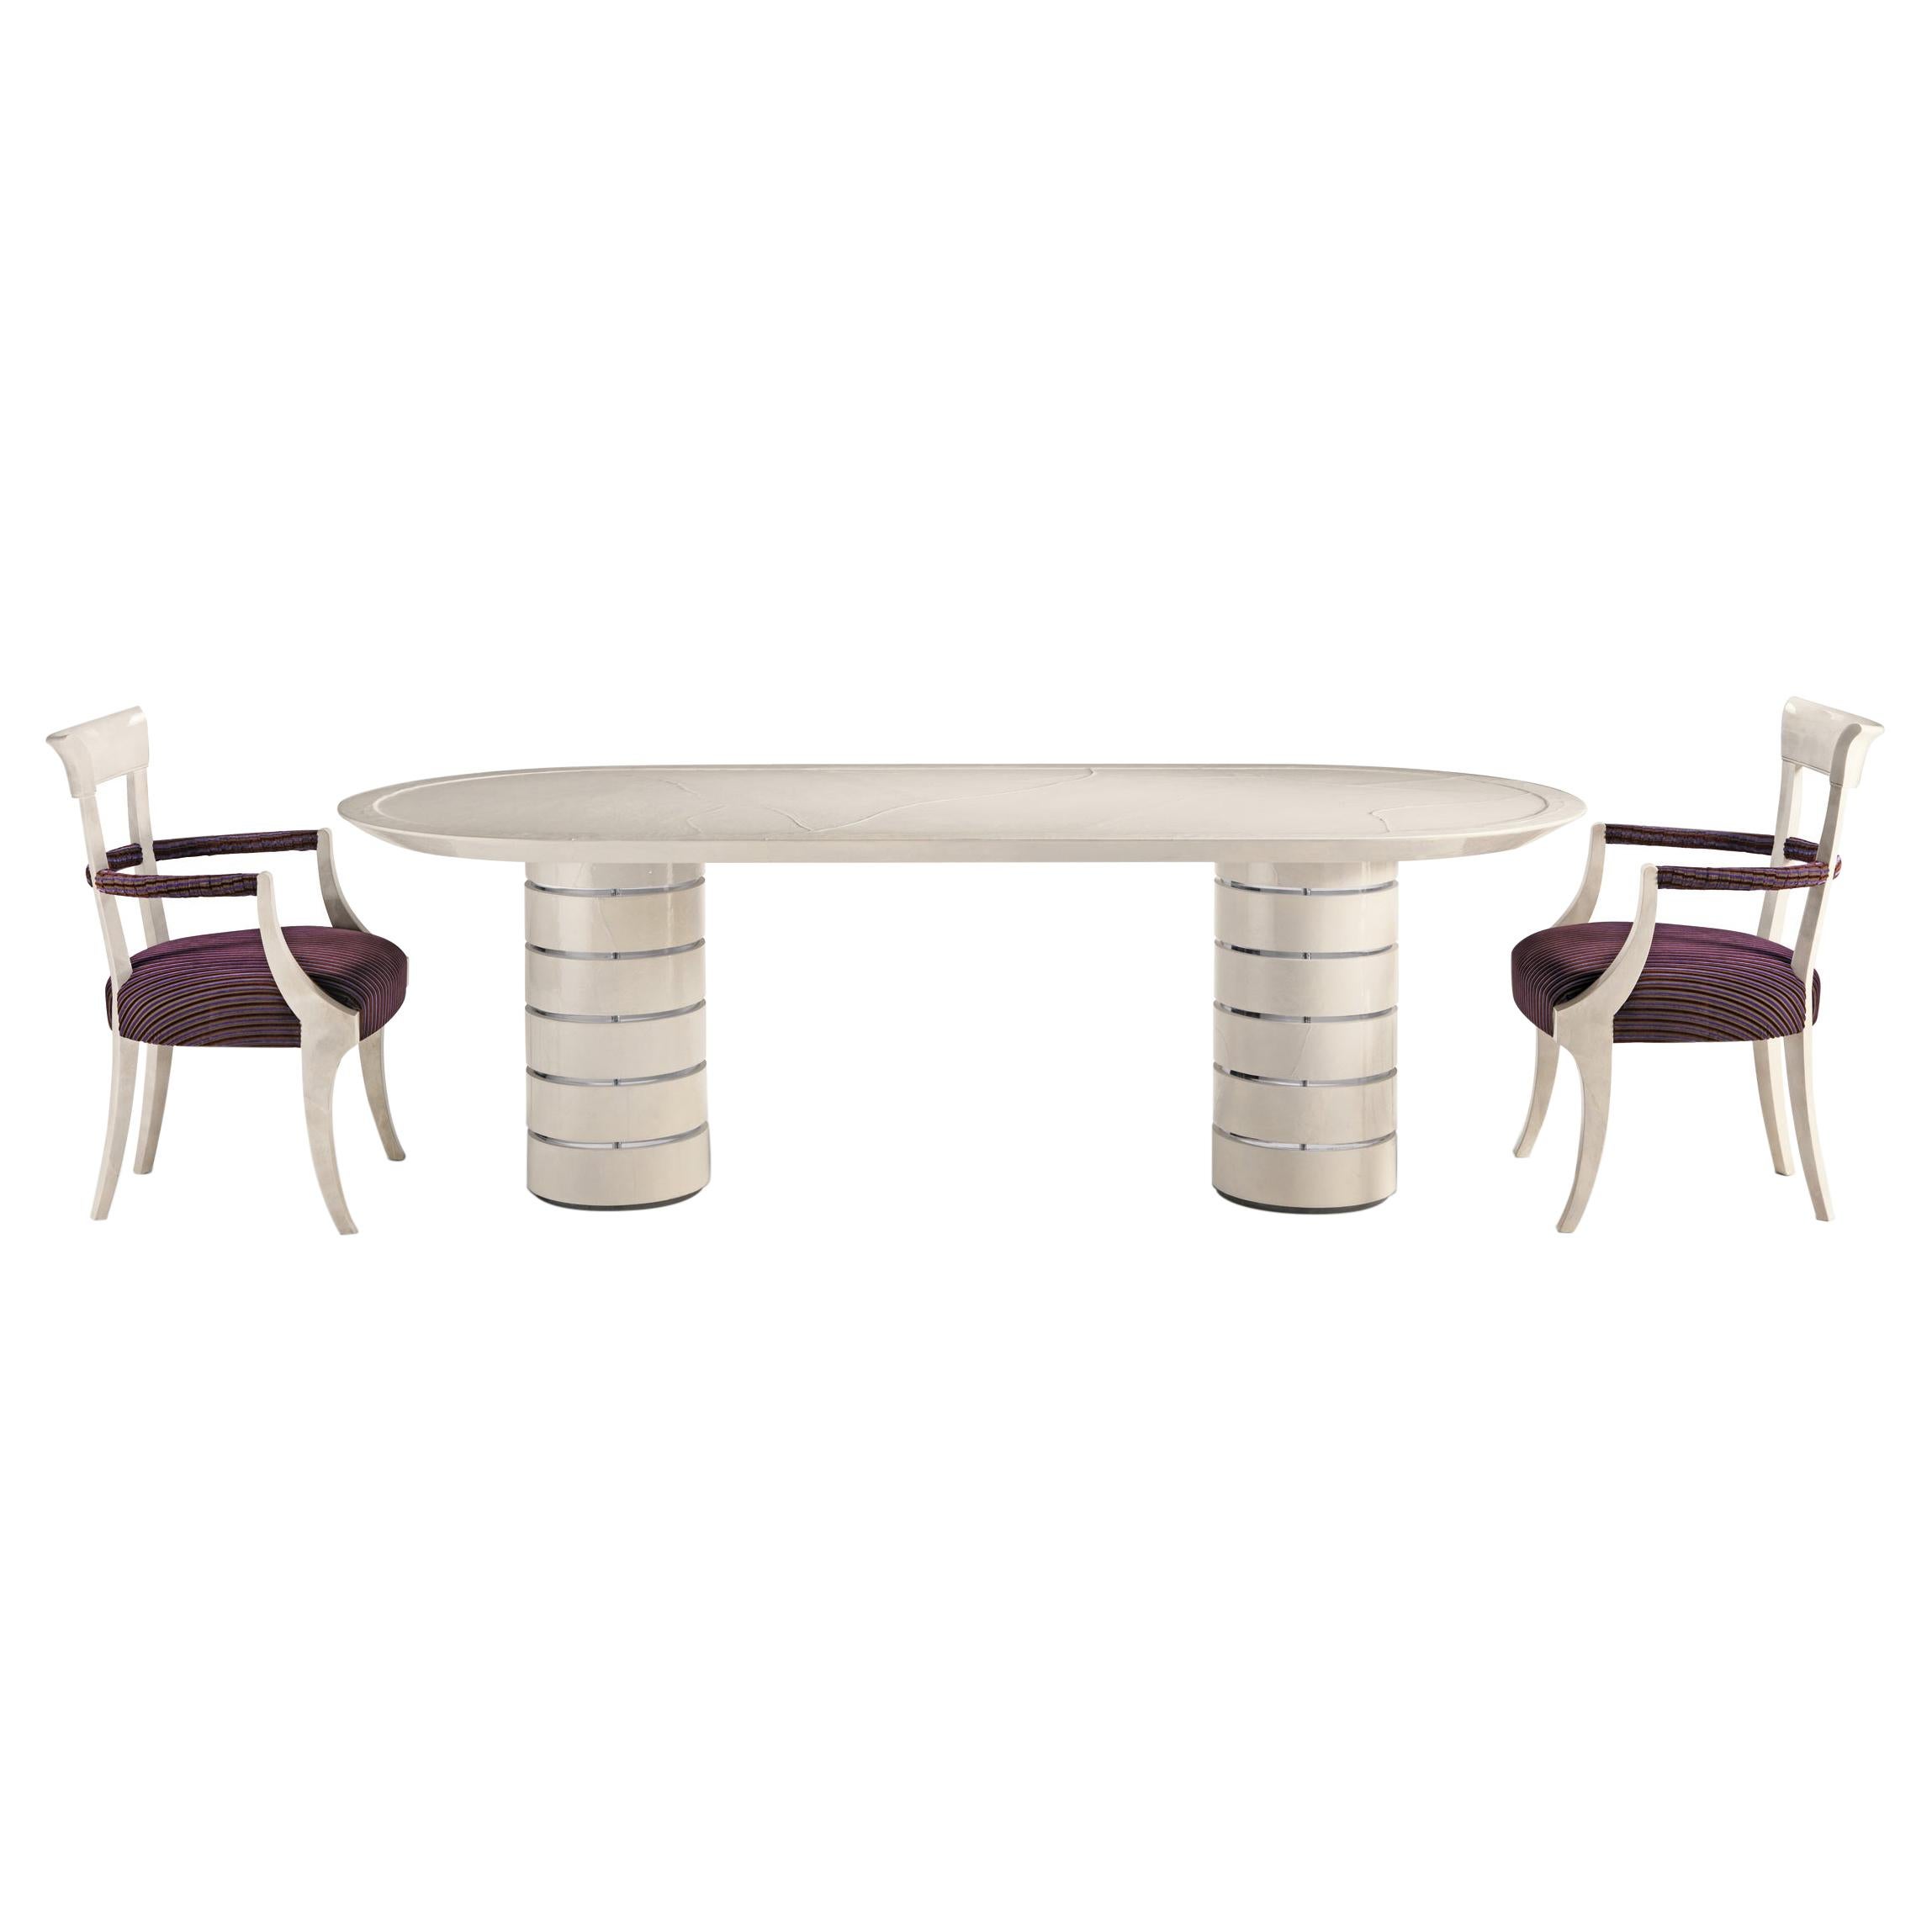 BLADE/T Oval White Dining Table with Plexiglas inserts and Concentric Circles